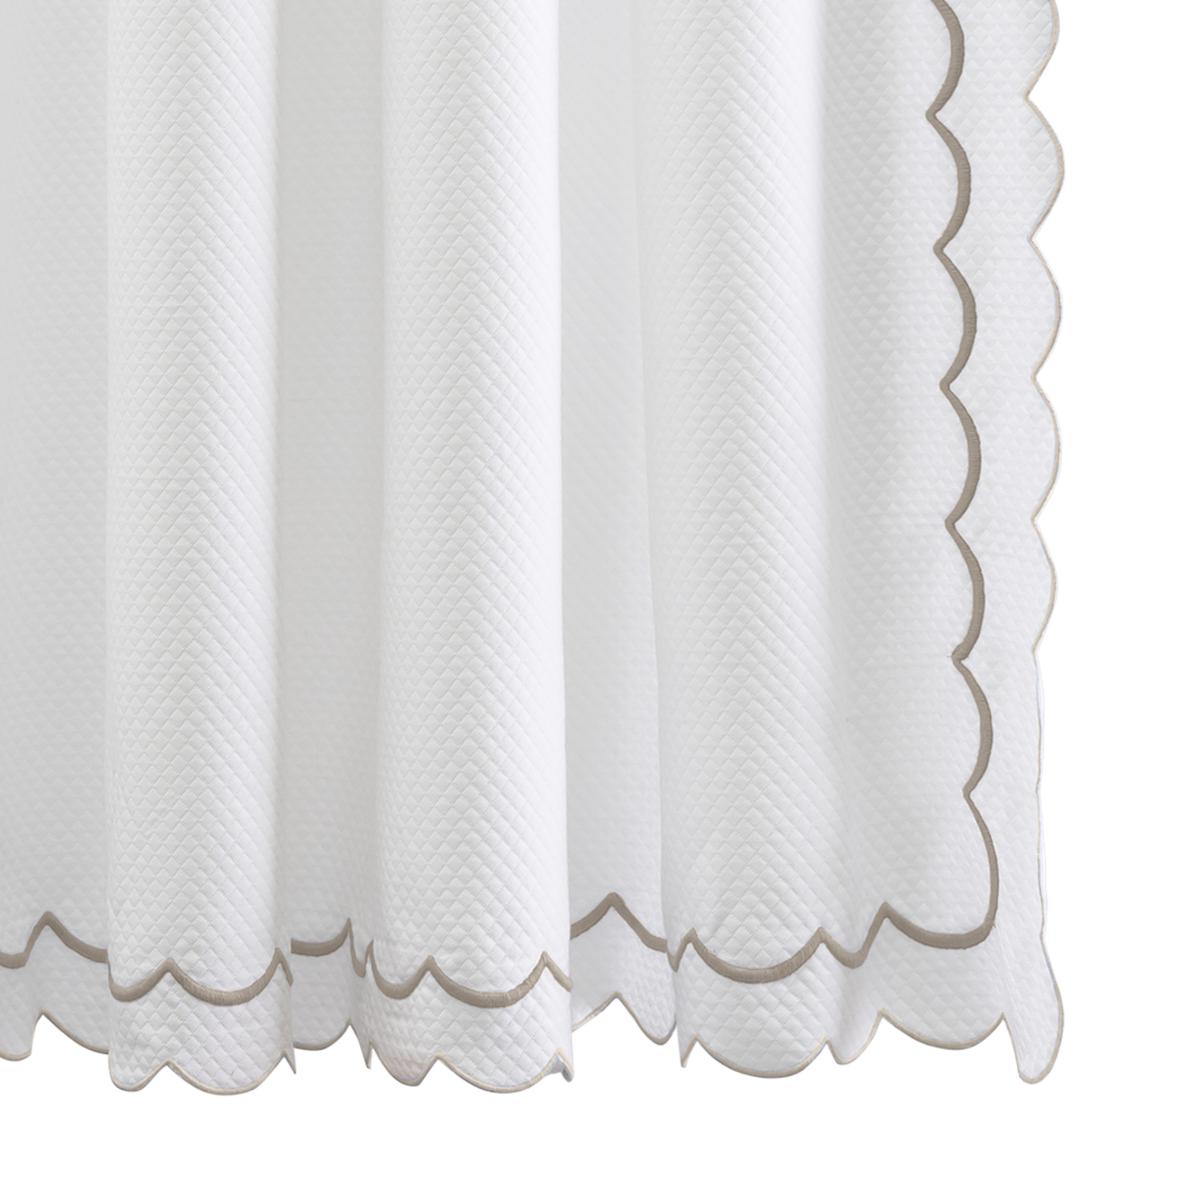 Hanging Edges of Matouk Indie Pique Shower Curtain in Driftwood Color